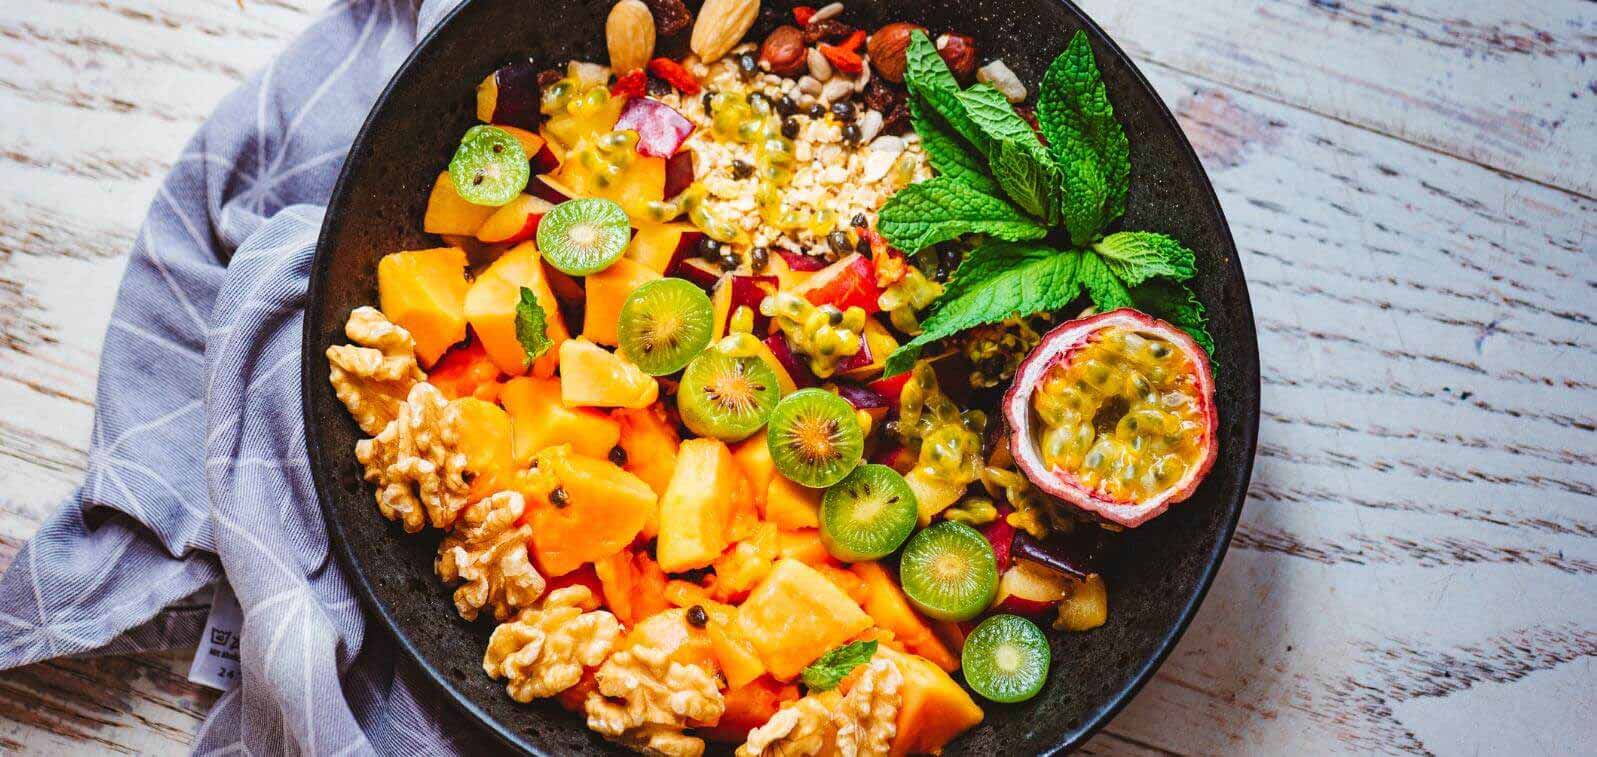 What is a plant-based diet, and is it healthy?